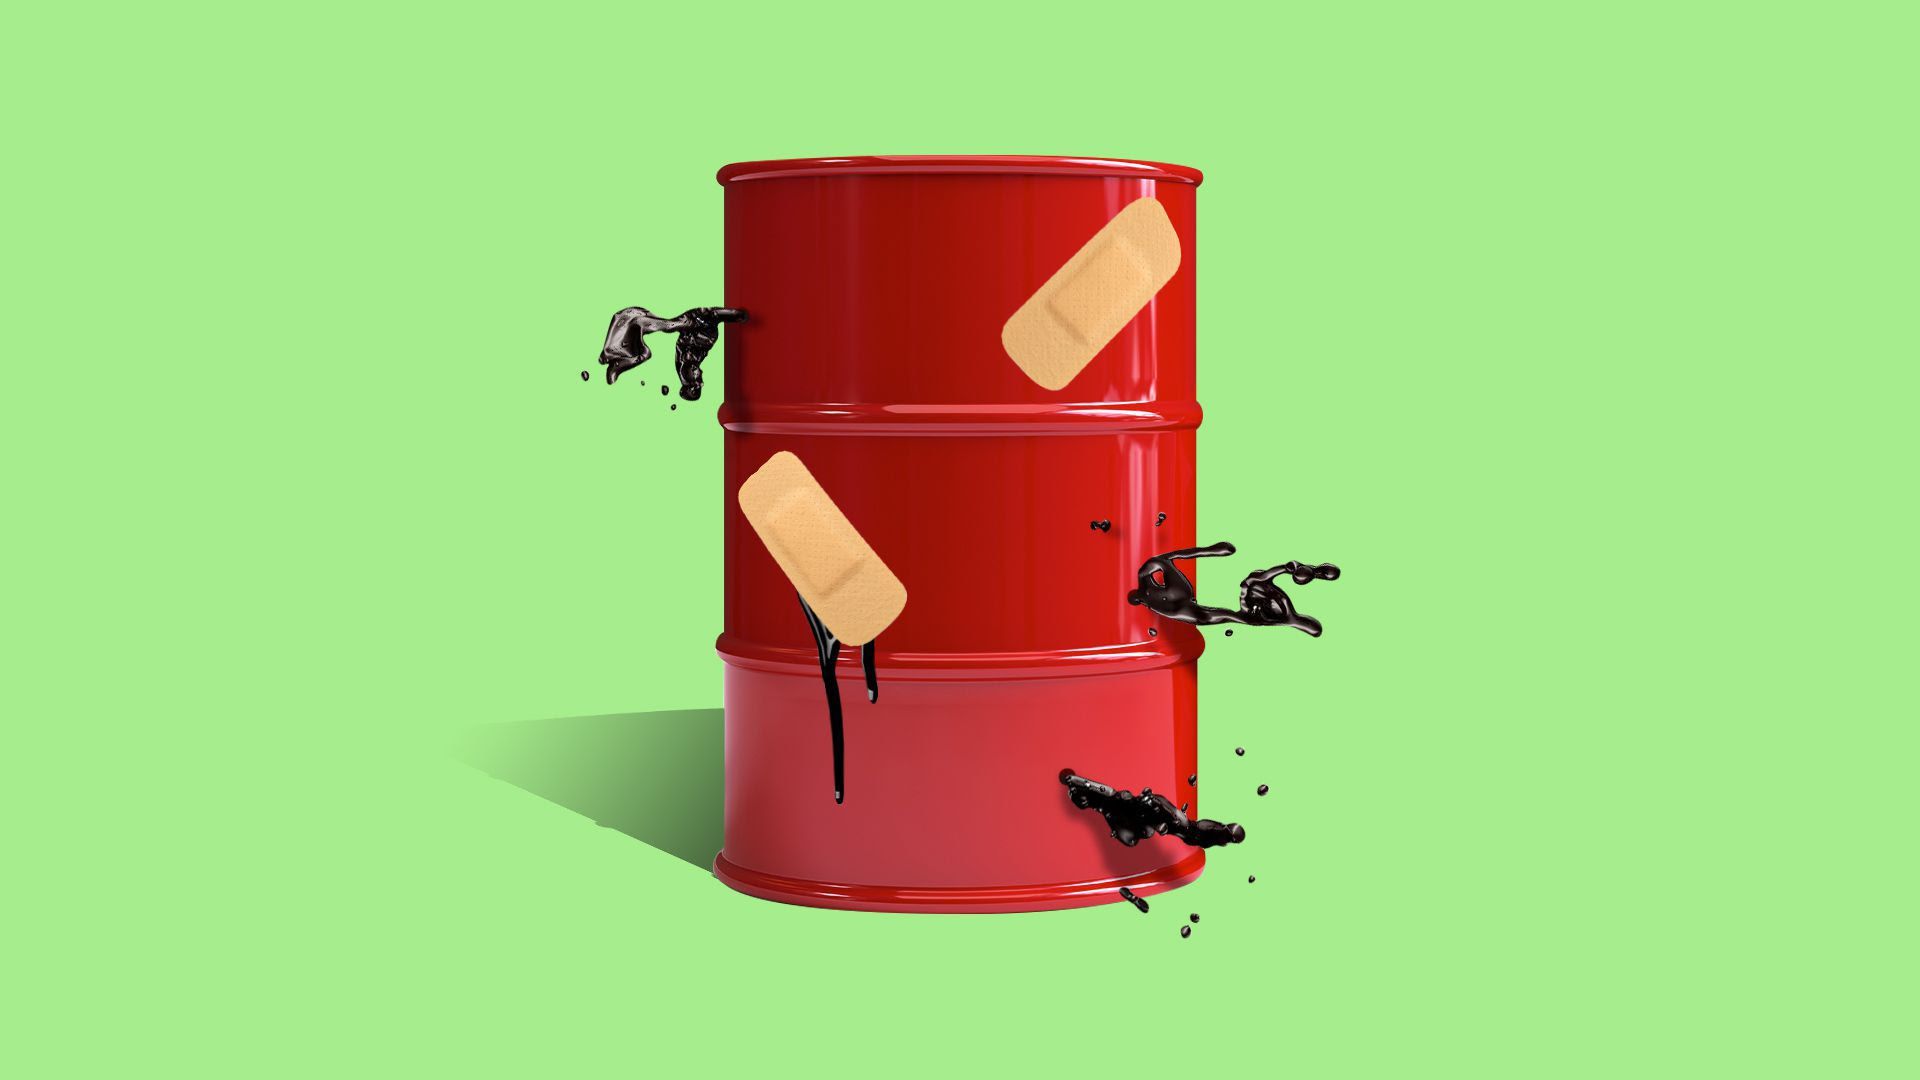 Illustration of a leaking oil barrel with bandaids